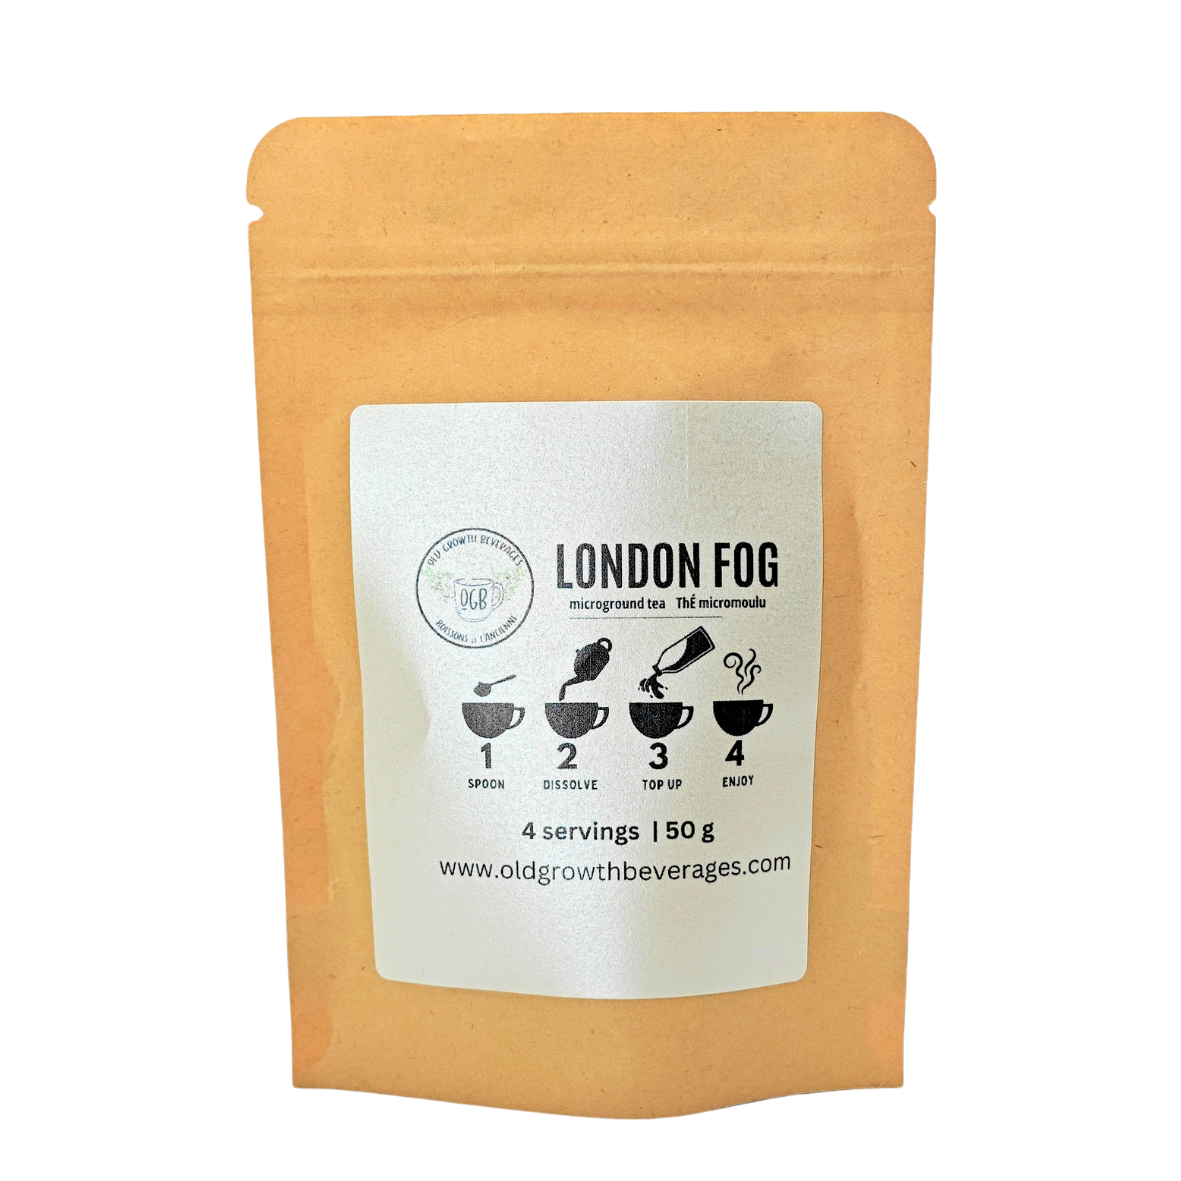 Trial and Travel Size London Fog 50g